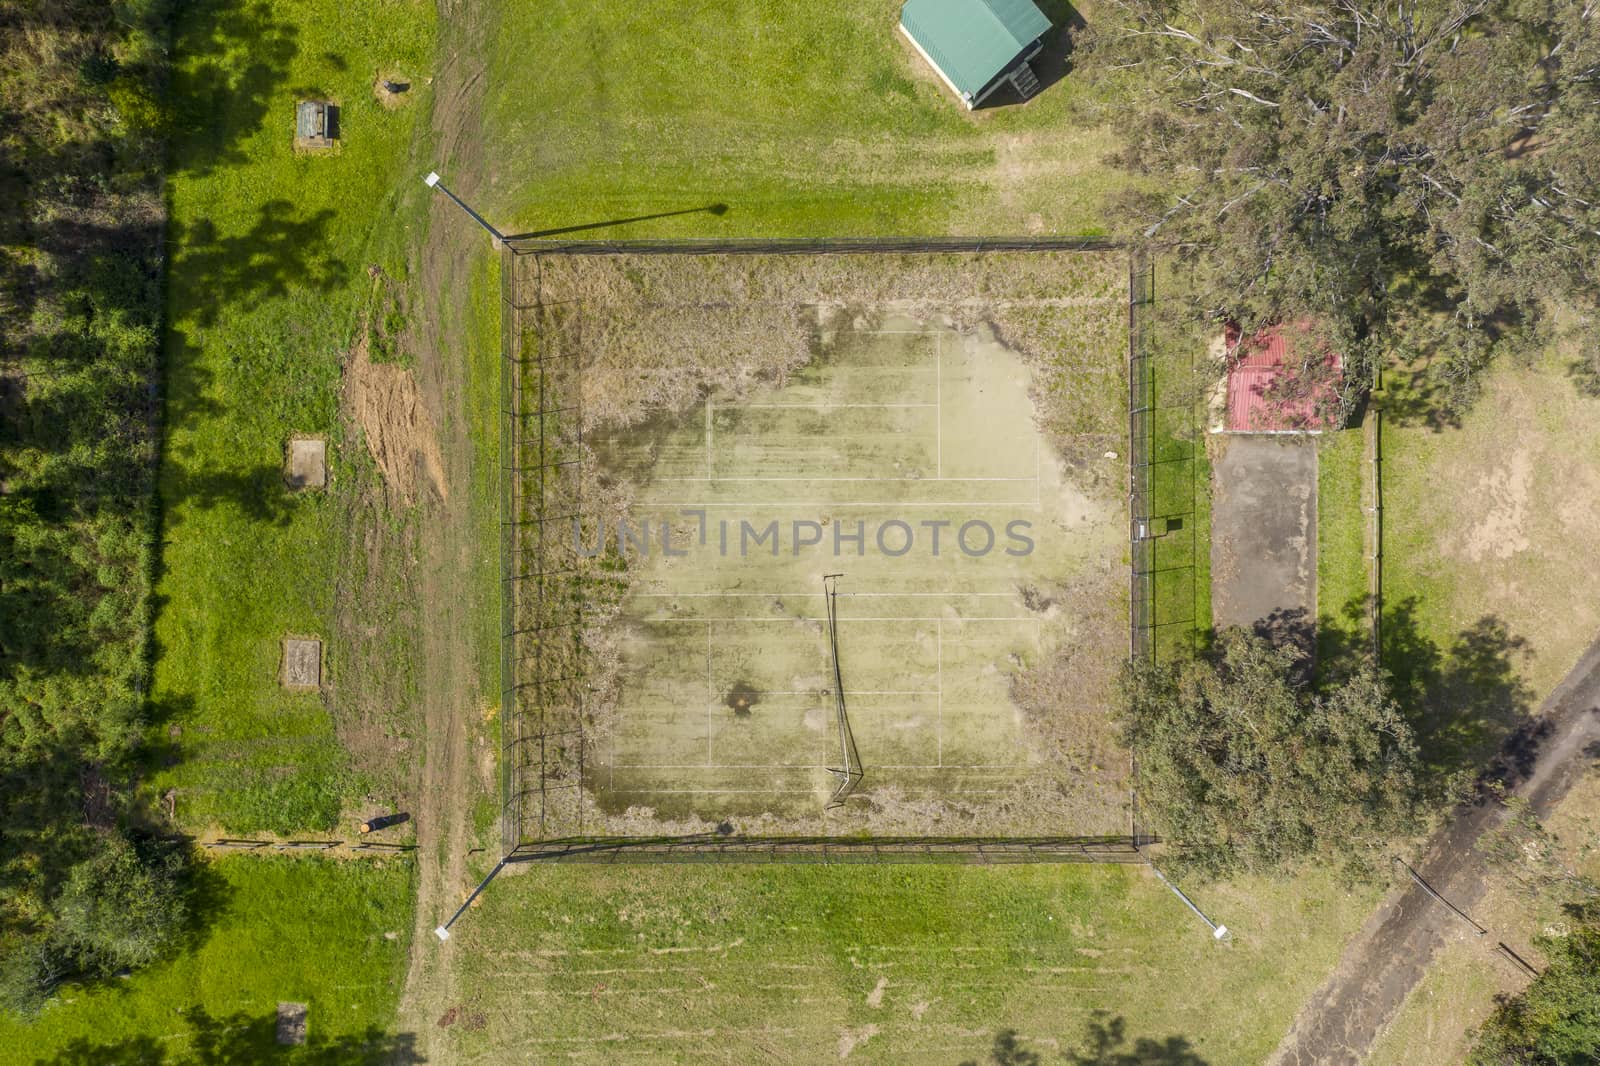 An old unused tennis court in a public park in a small town by WittkePhotos